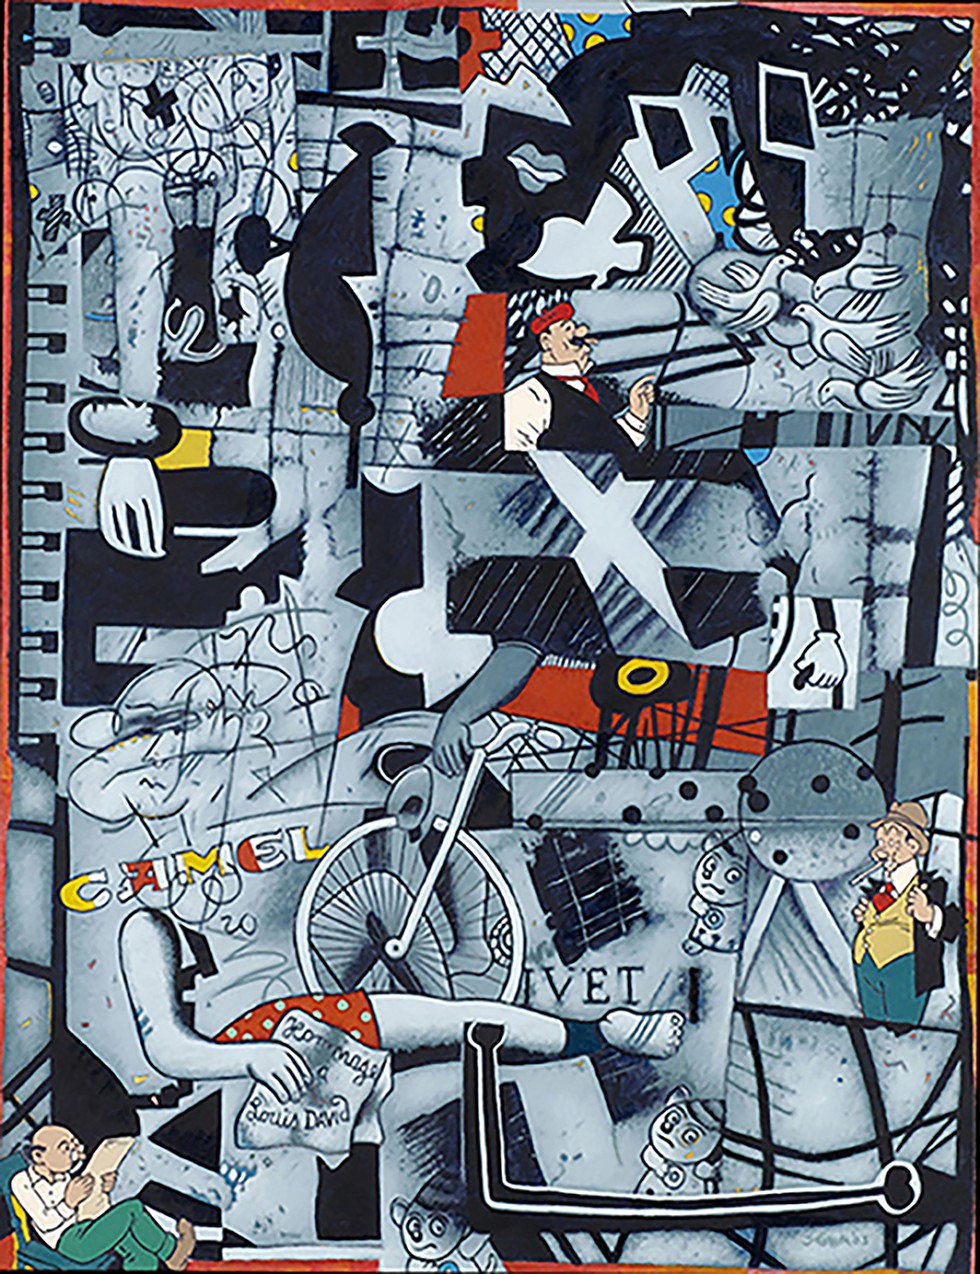 "Funny Paper #58," 52" X 40", acrylic on canvas, 2005